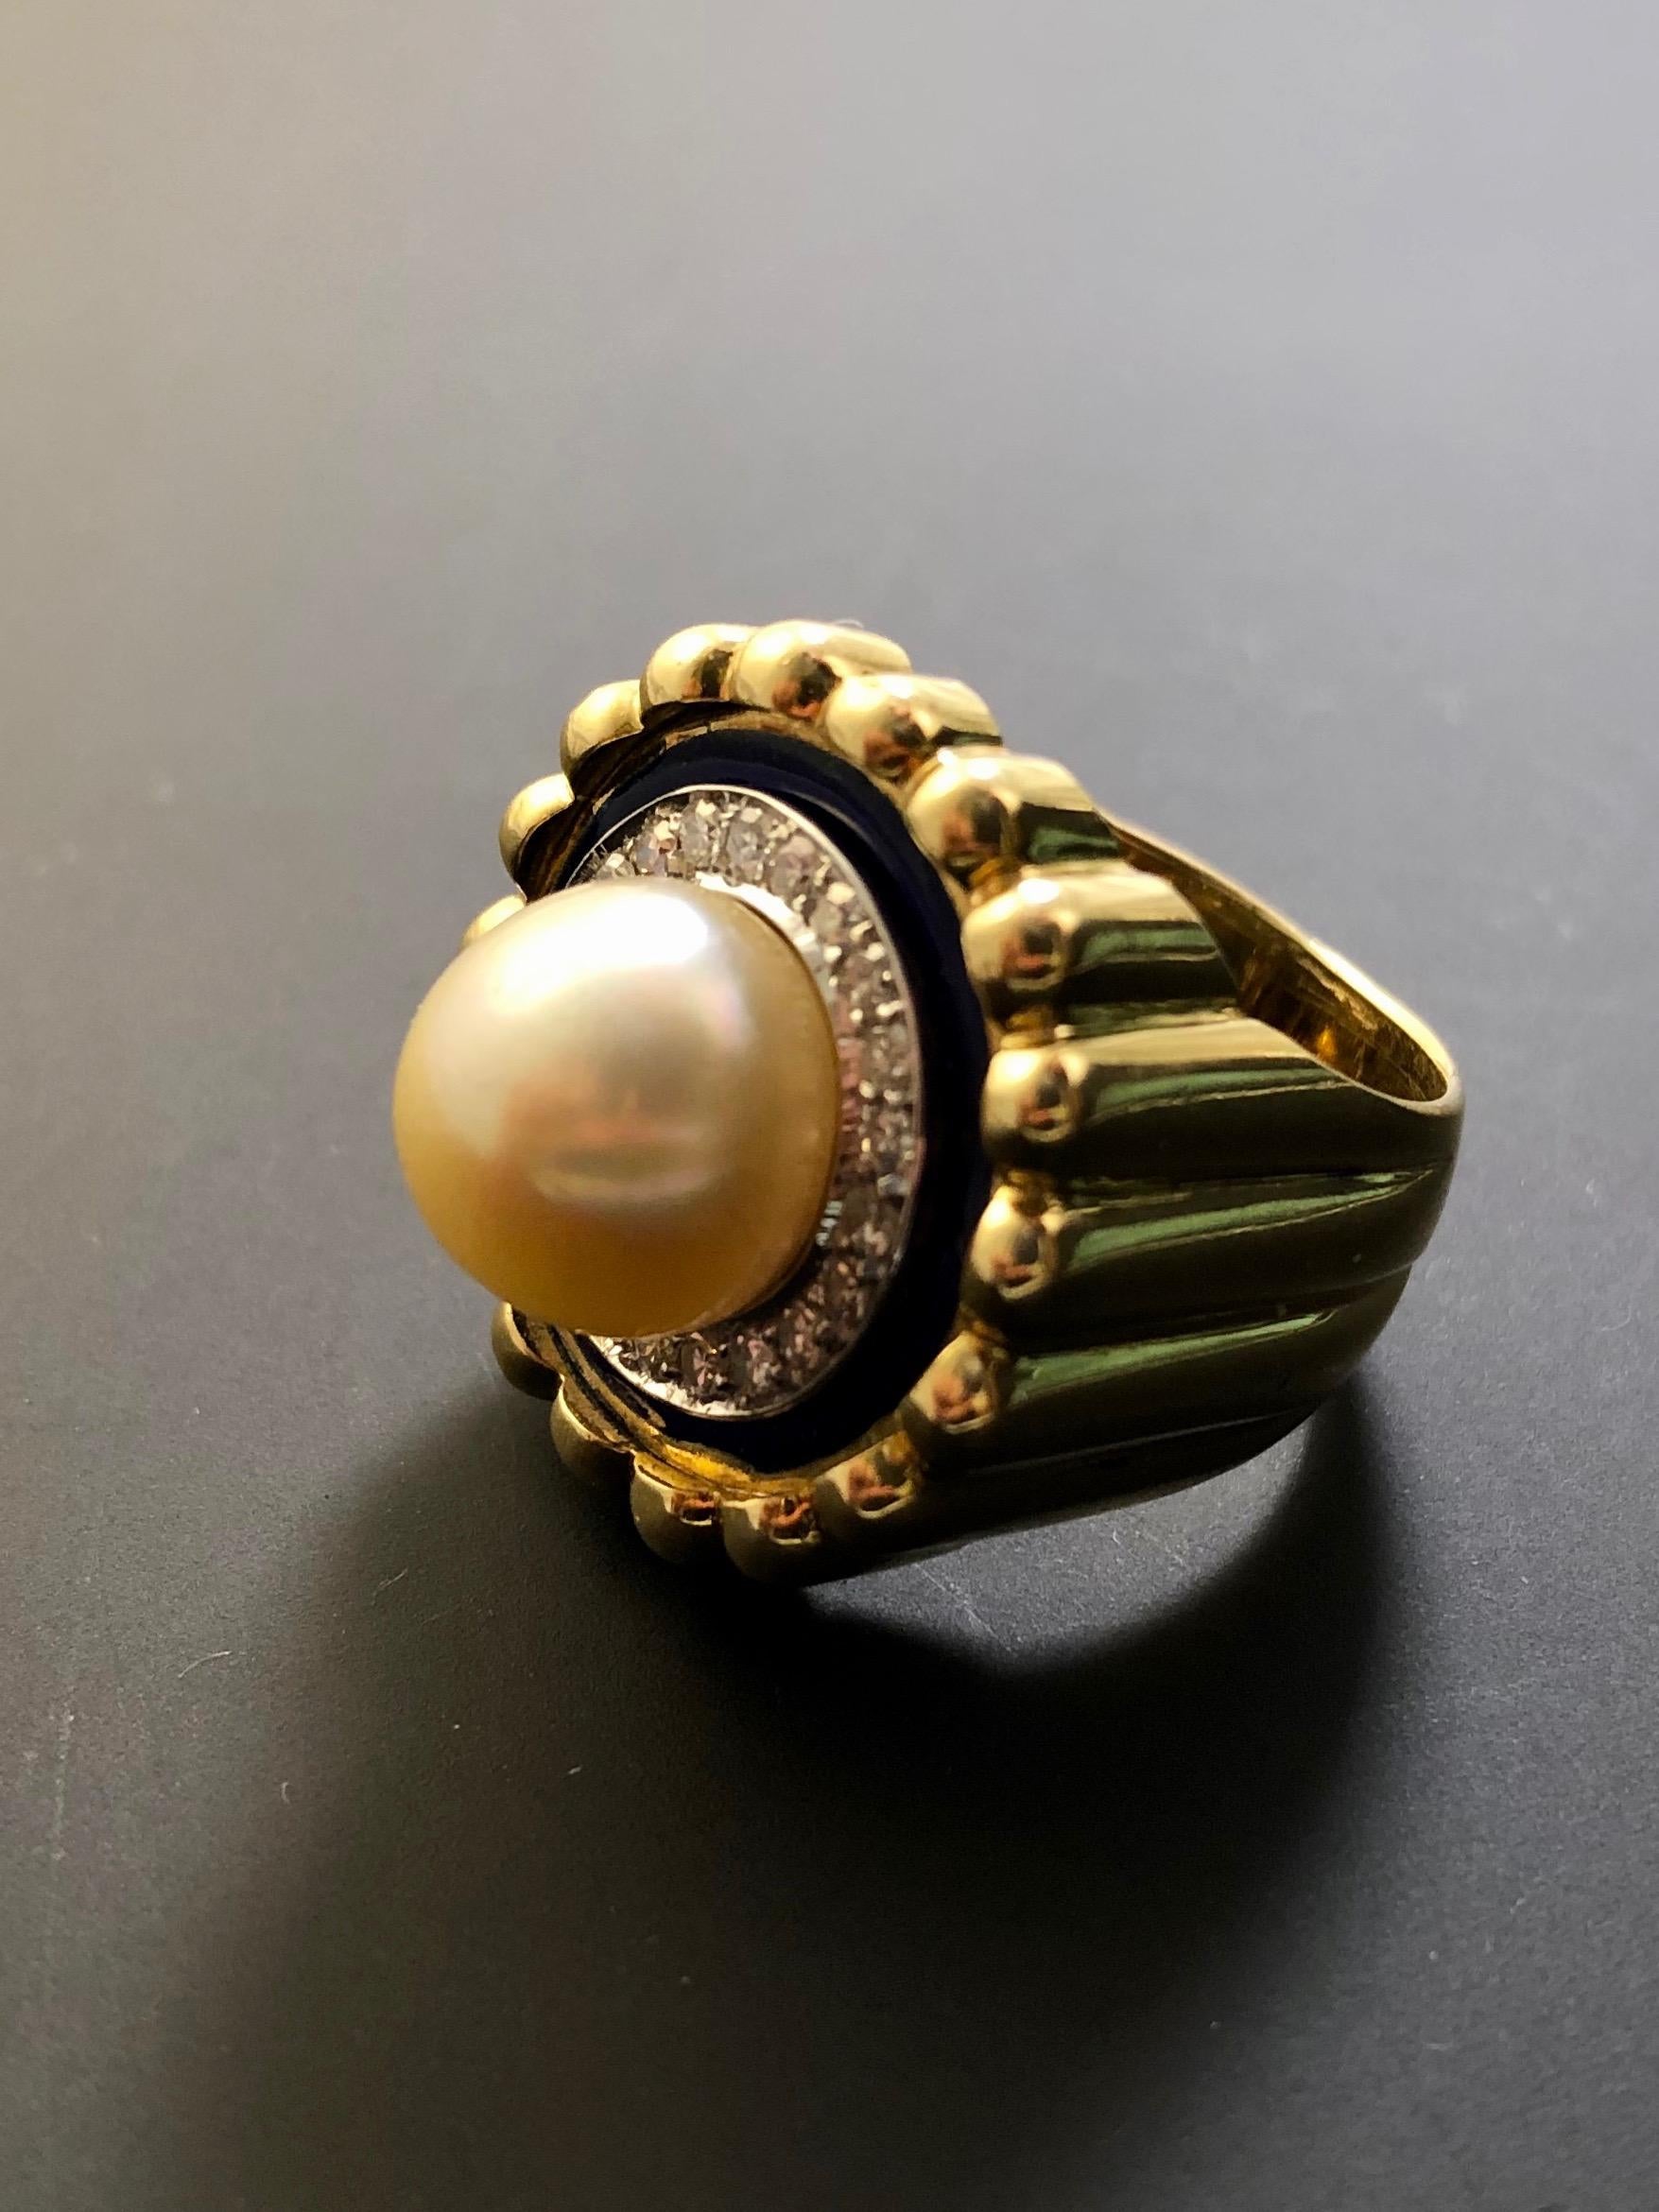 Vintage ring
Material 18k yellow gold
Diamonds brilliant cut
Pearl
Weight 18,33 grams
Size EU 16 - US 7.75